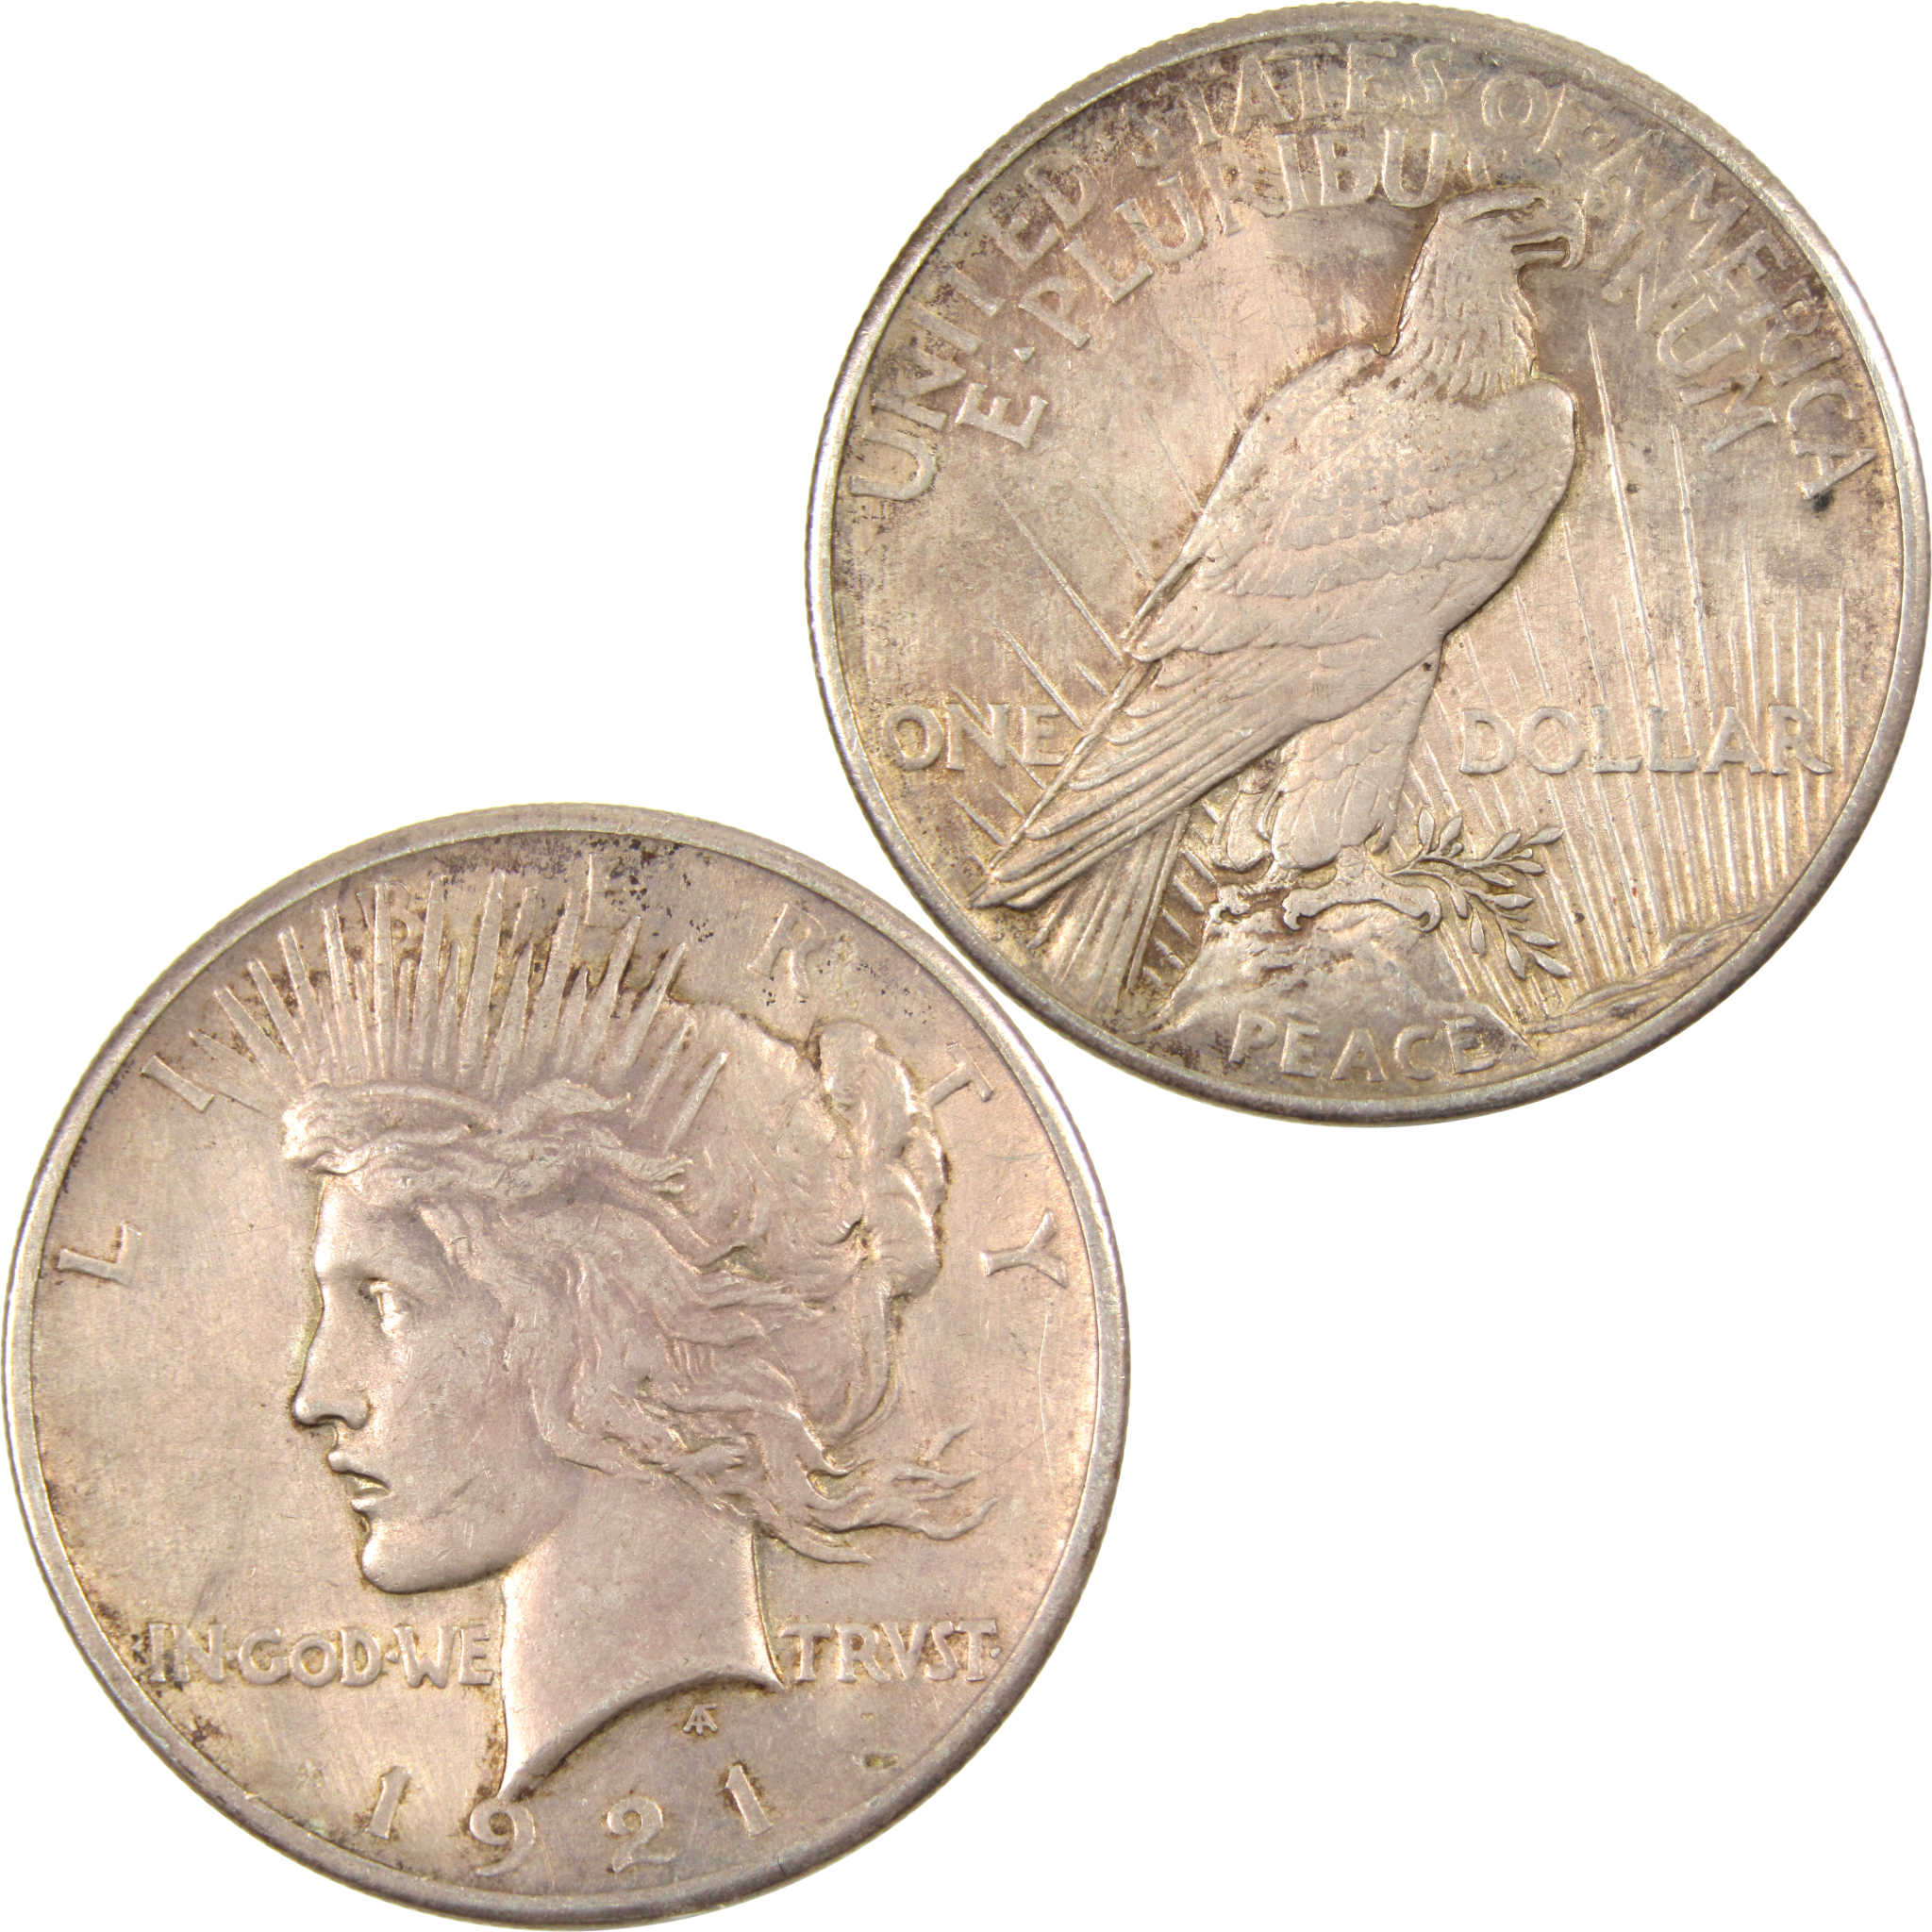 1921 High Relief Peace Dollar XF Details 90% Silver $1 Coin SKU:I4130